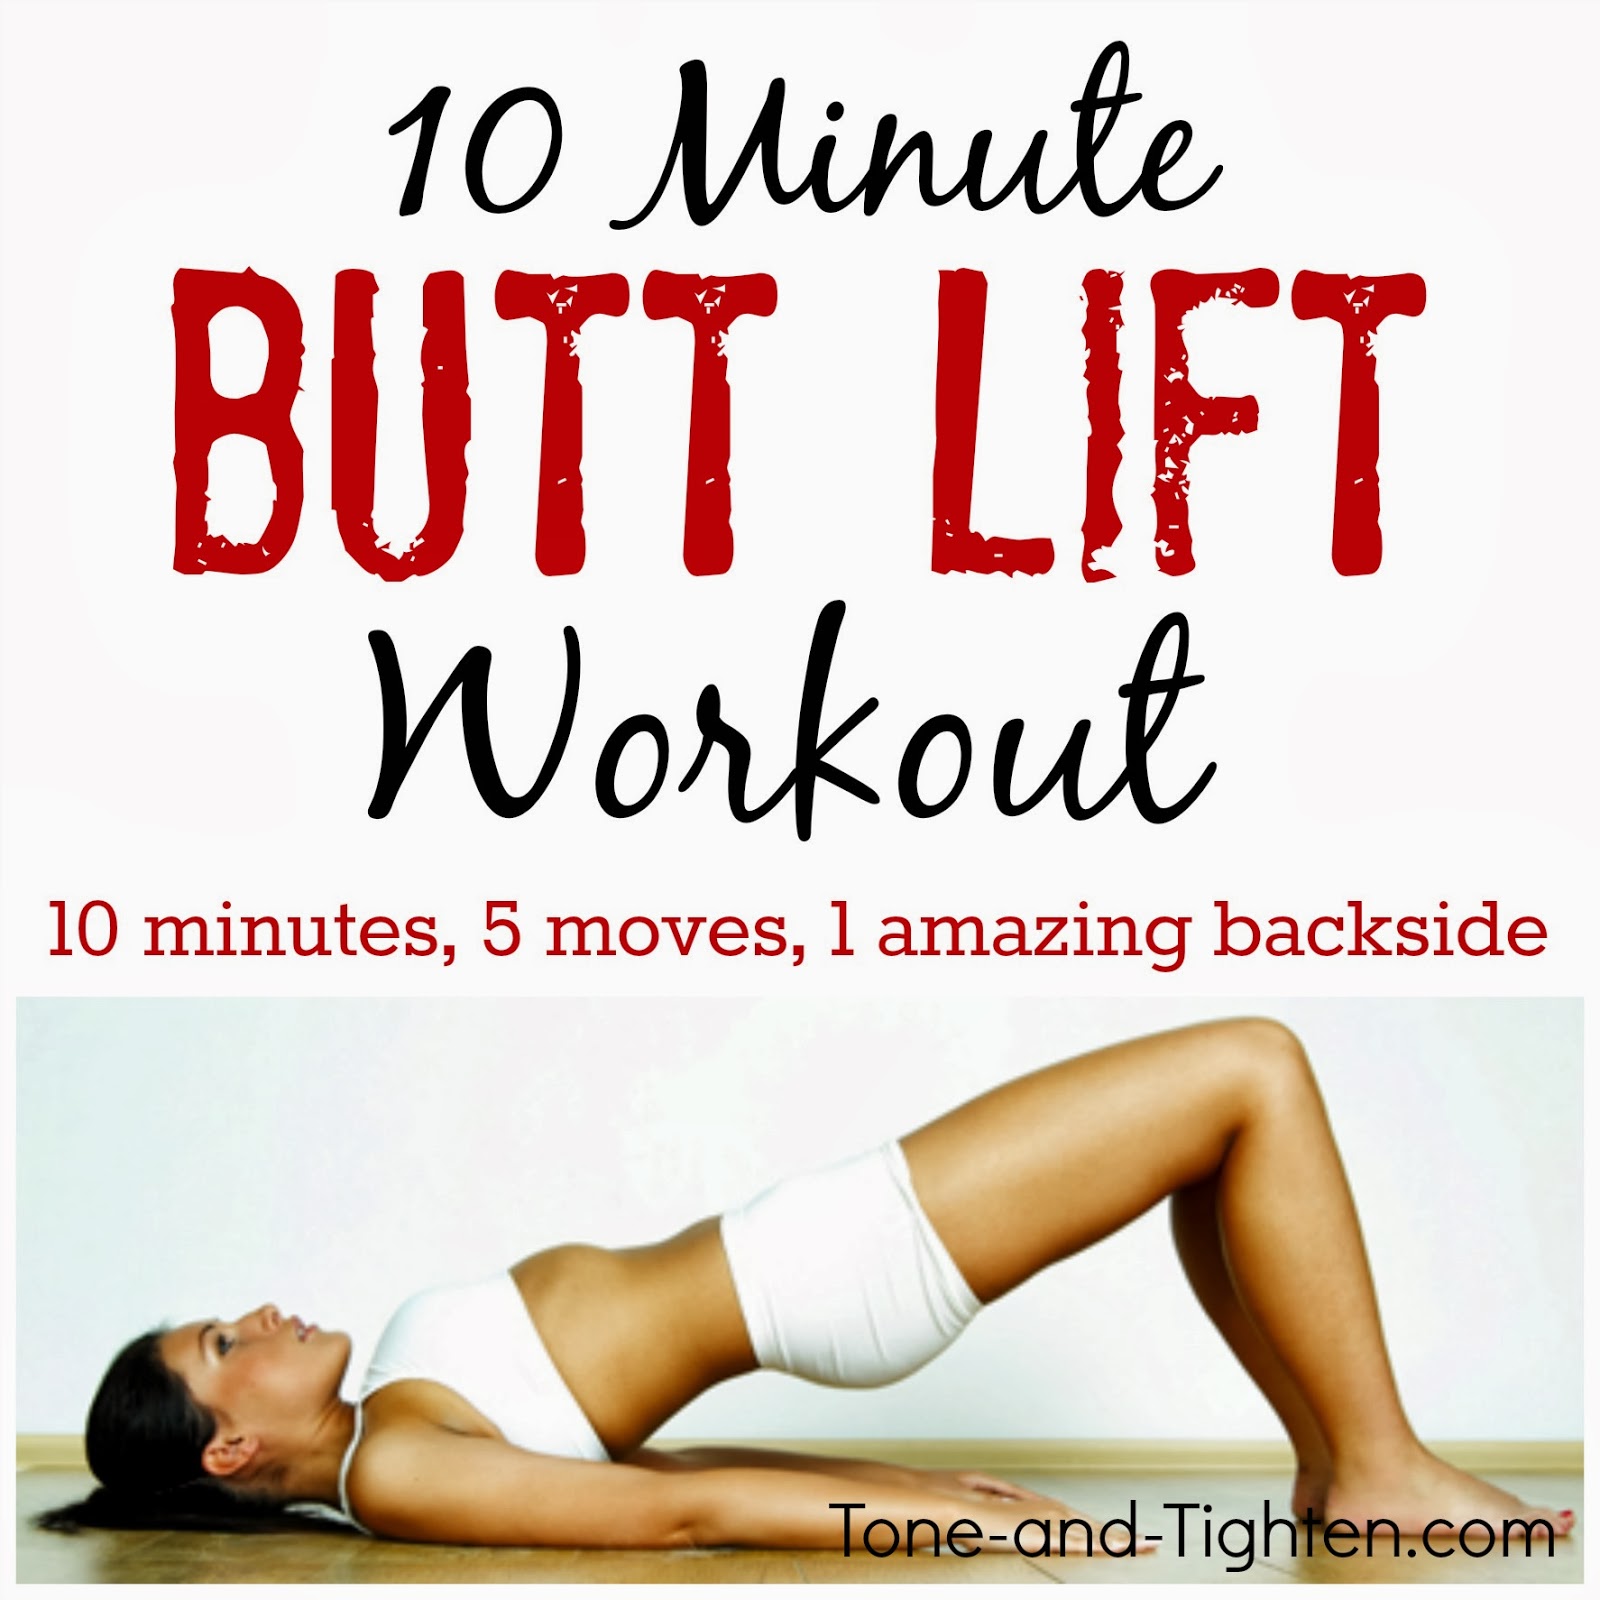 Excersises For Your Butt 70